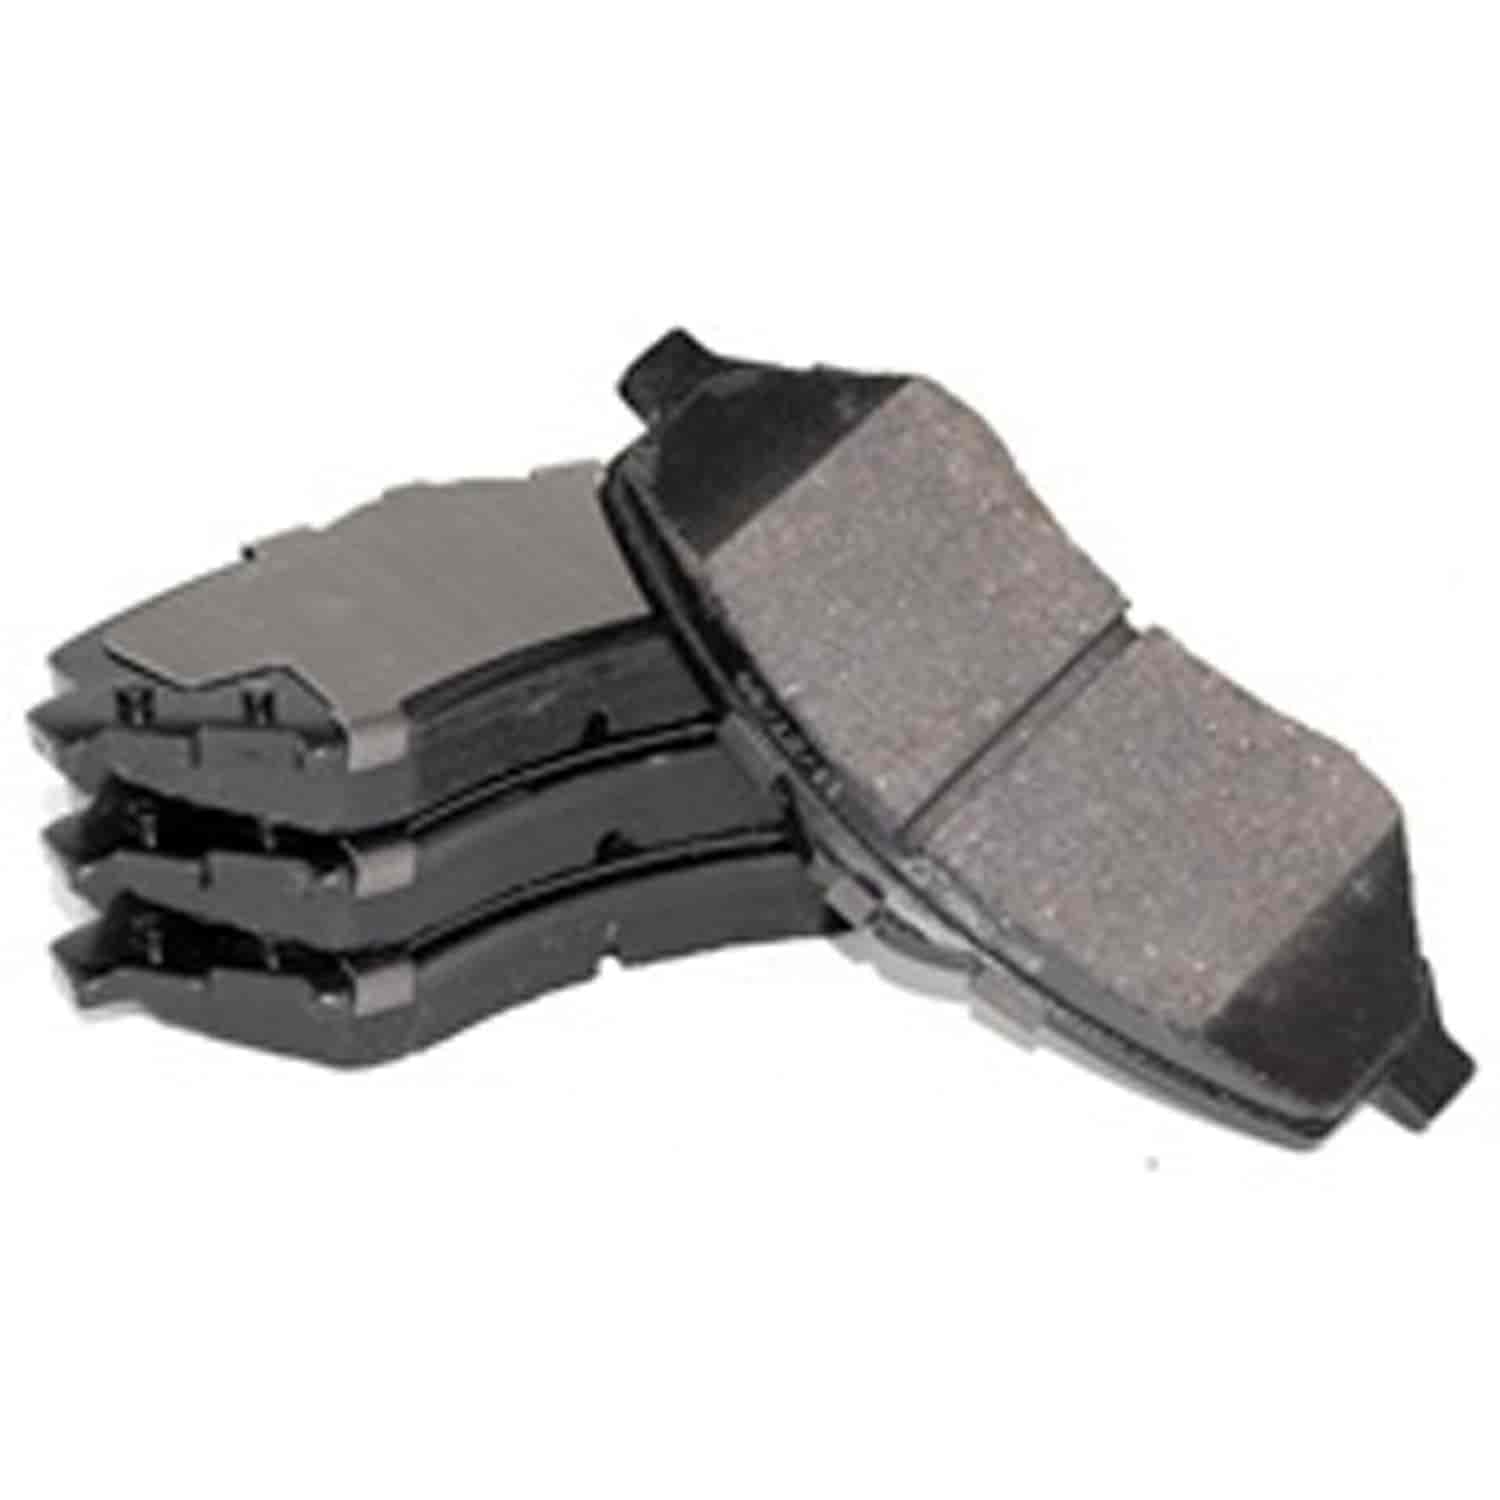 This set of front disc brake pads from